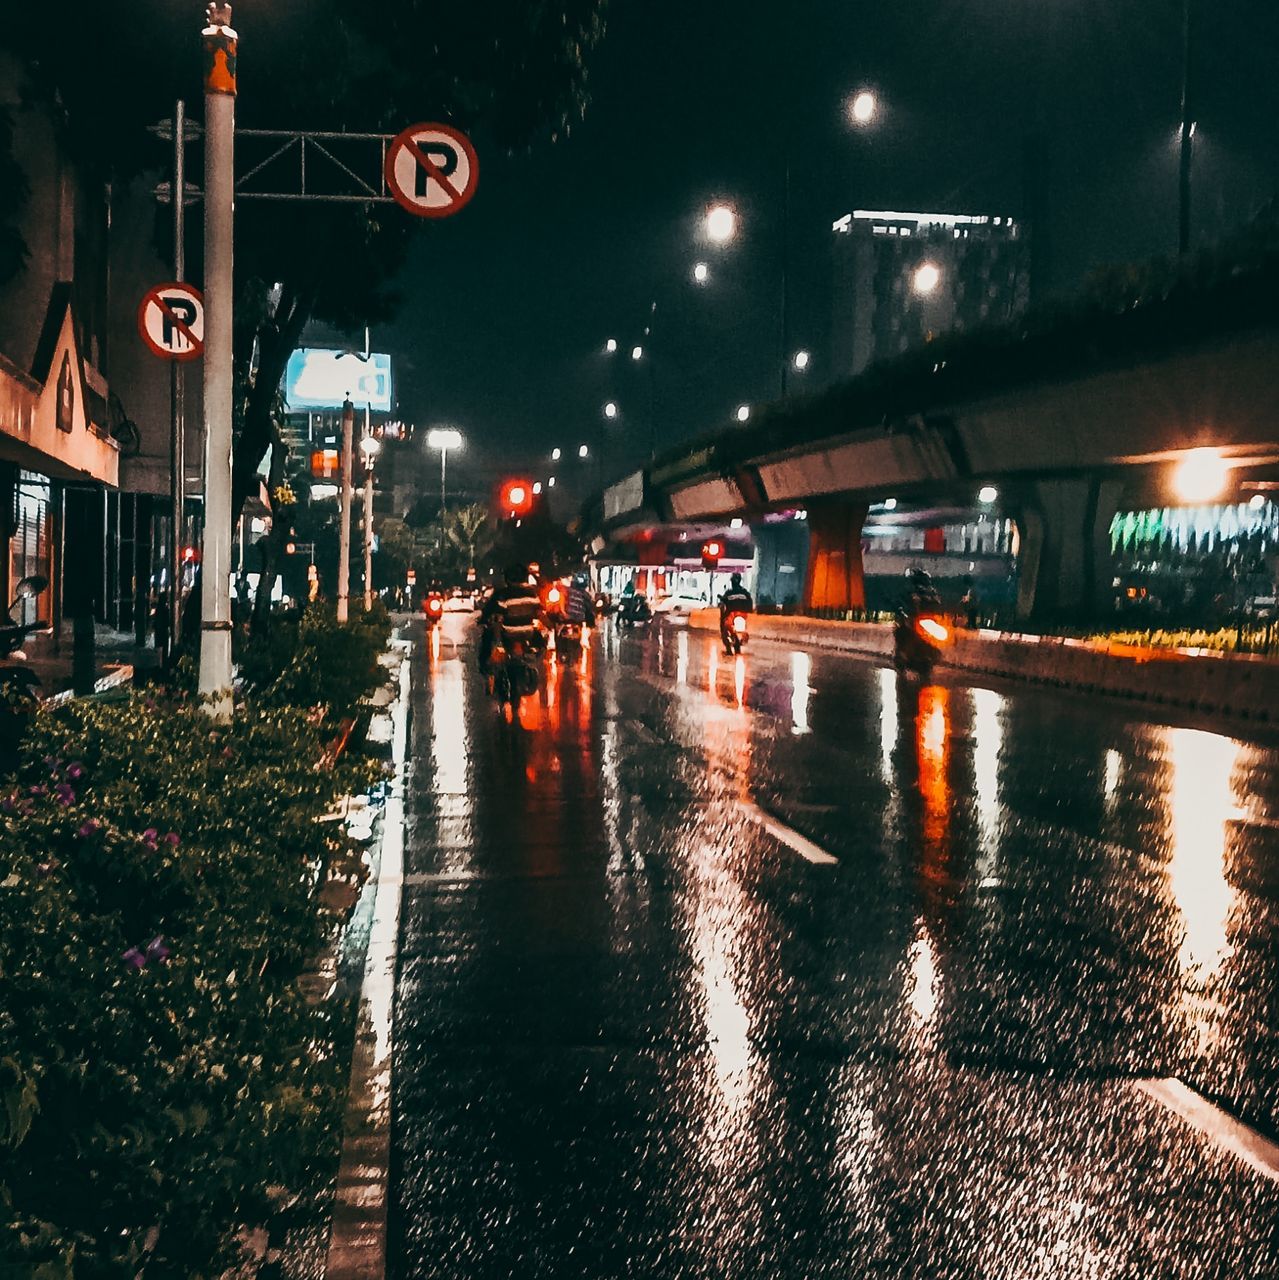 night, illuminated, city, architecture, street, transportation, built structure, building exterior, evening, light, road, mode of transportation, darkness, water, wet, lighting, sign, nature, street light, car, motor vehicle, rain, city life, no people, city street, reflection, lighting equipment, outdoors, urban area, road sign, land vehicle, cityscape